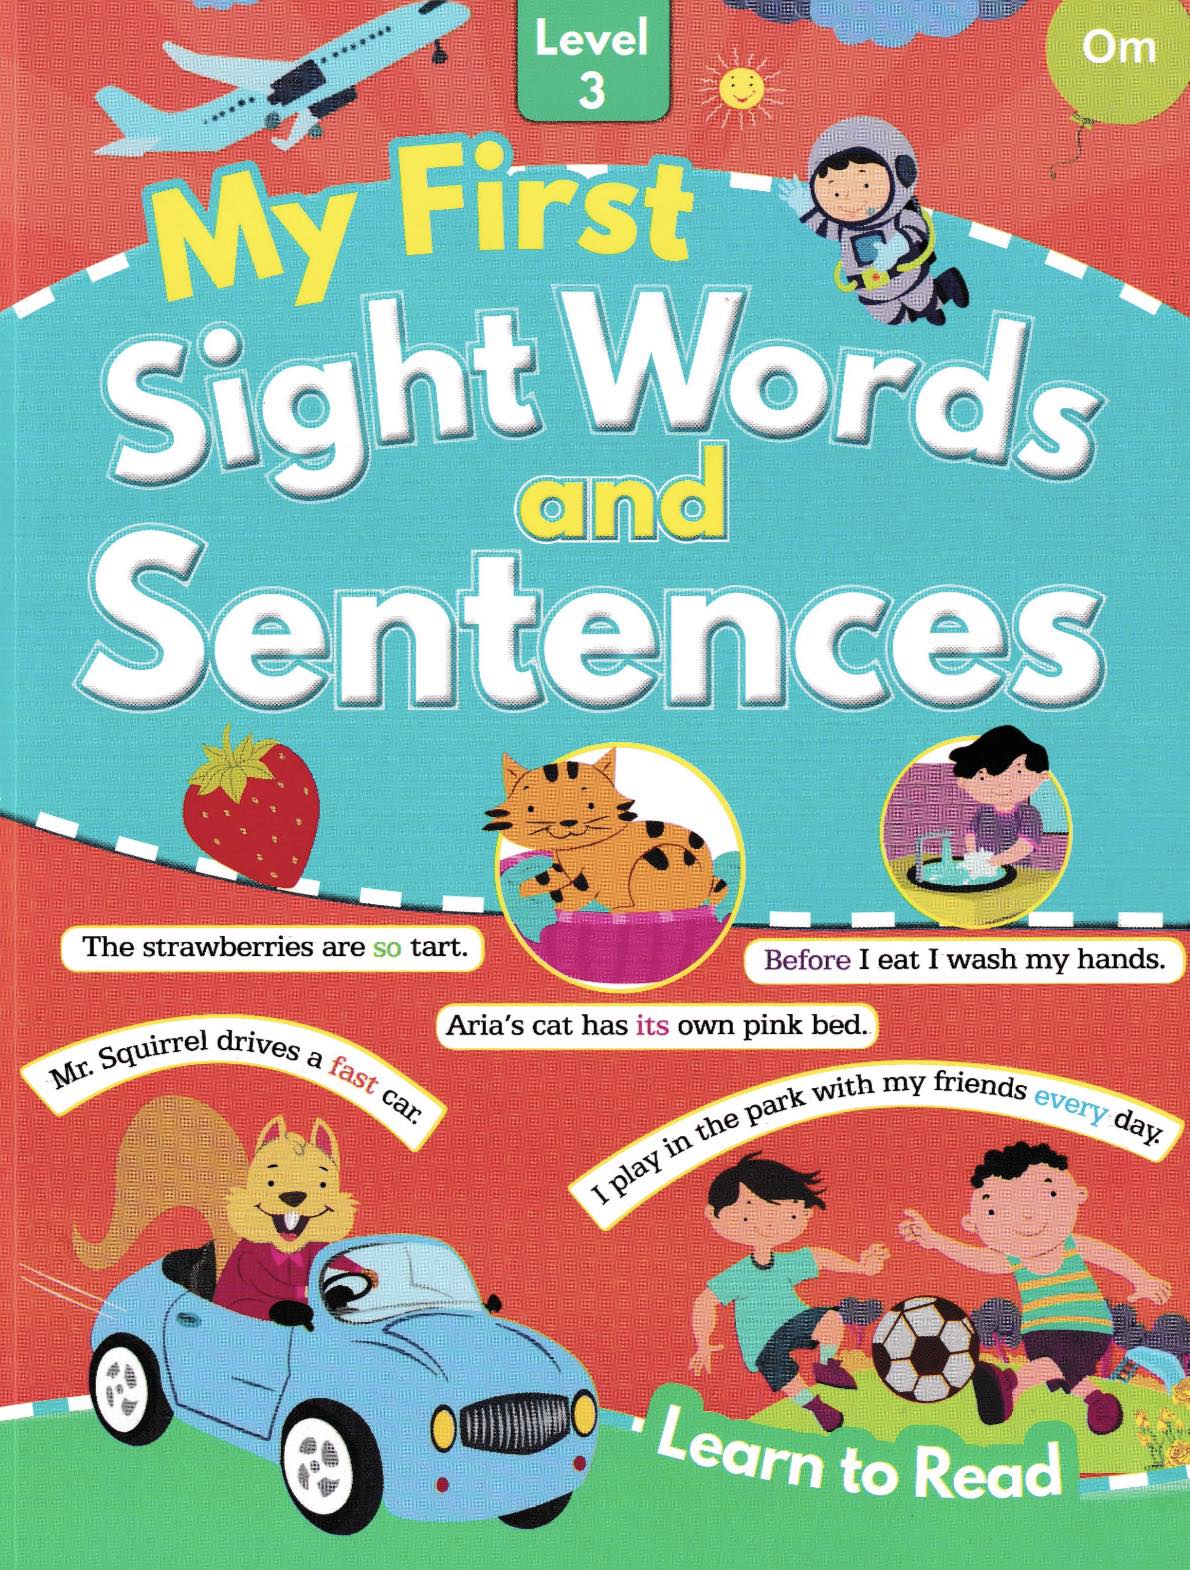 My First Sight Words and Sentences Level 1 to 3